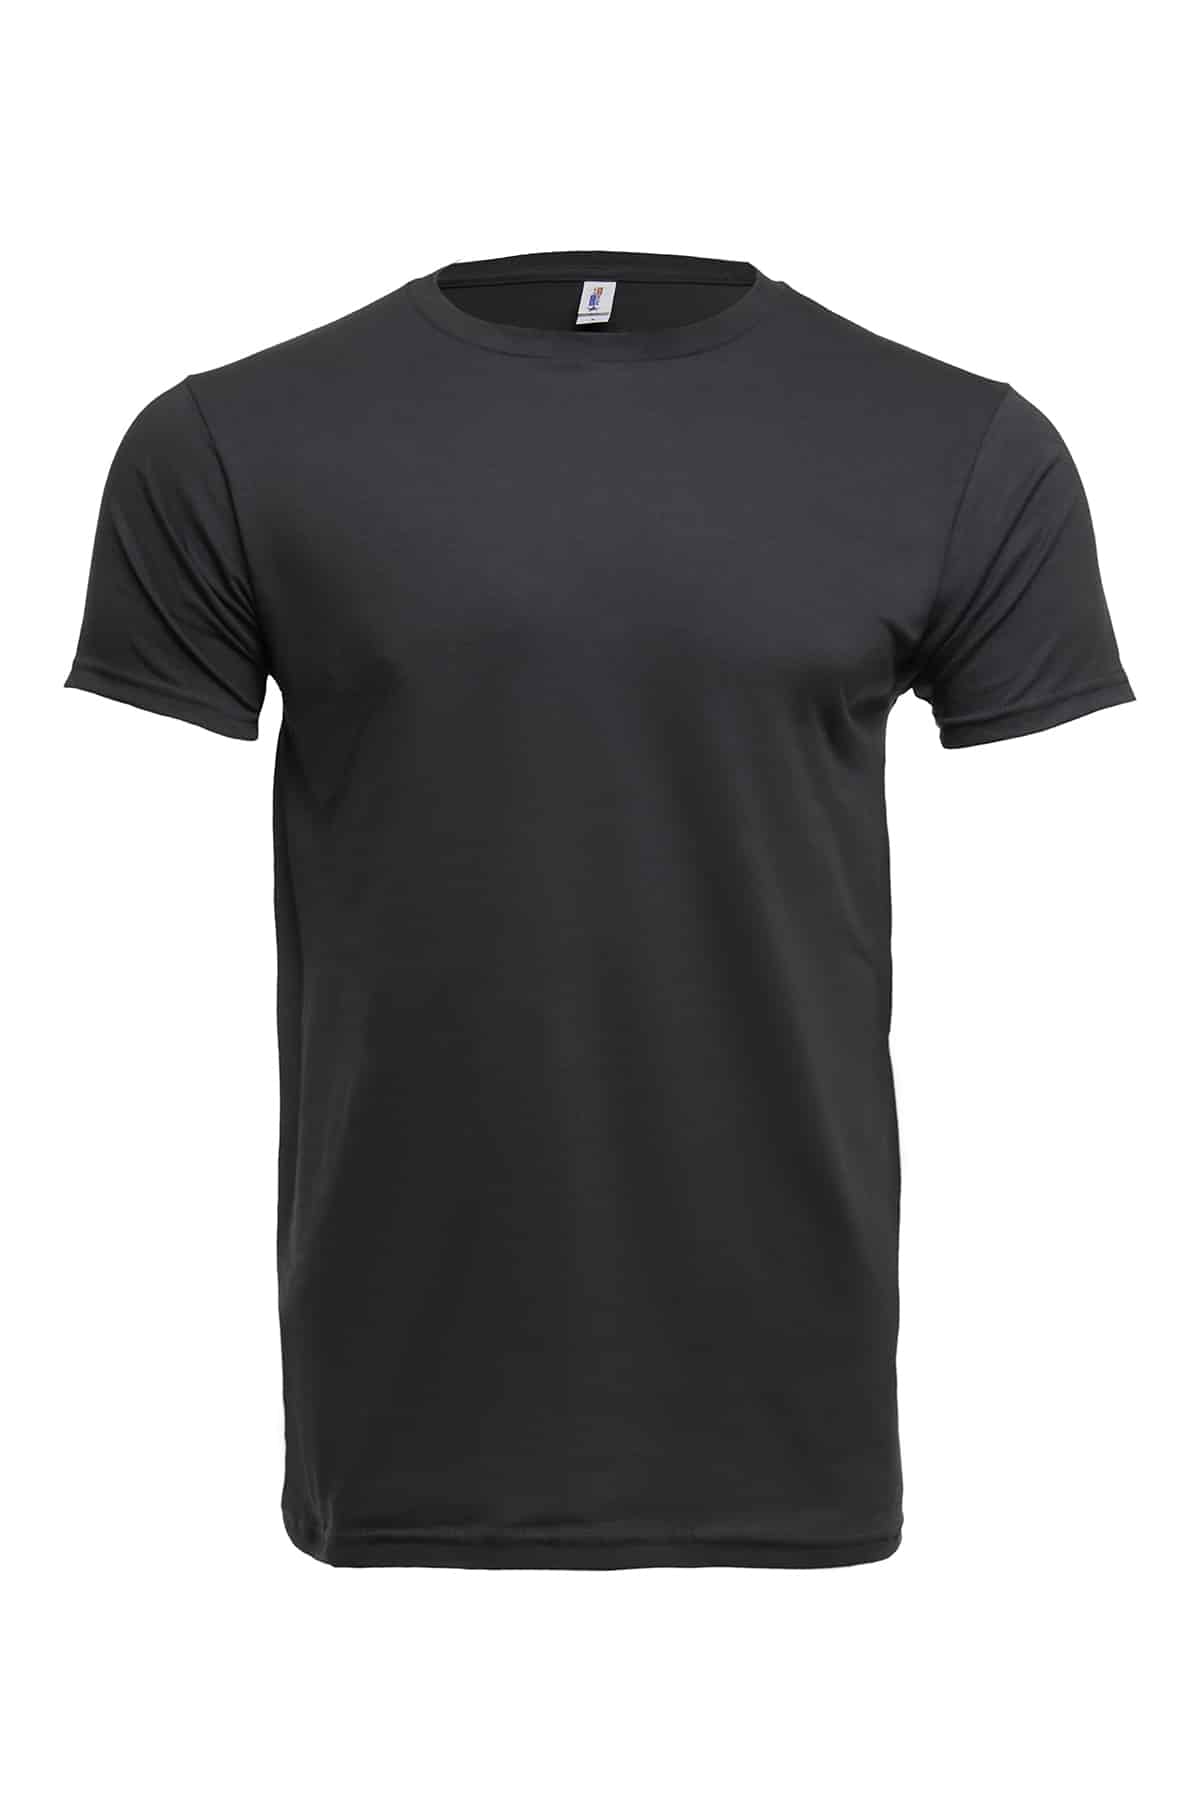 3100 Charcoal Front T-shirt